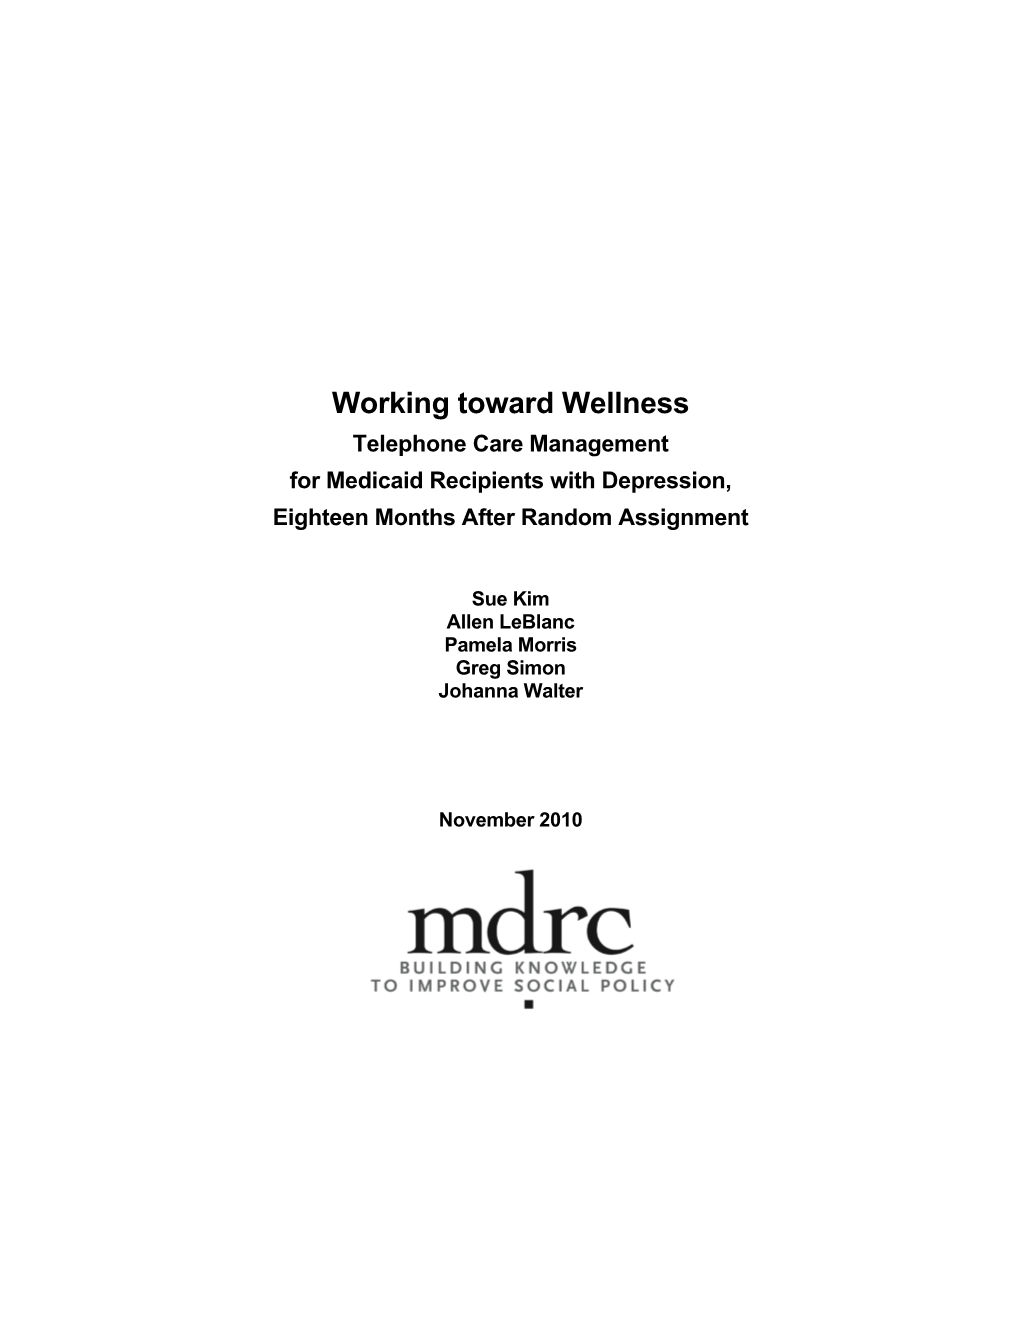 Working Toward Wellness Telephone Care Management for Medicaid Recipients with Depression, Eighteen Months After Random Assignment